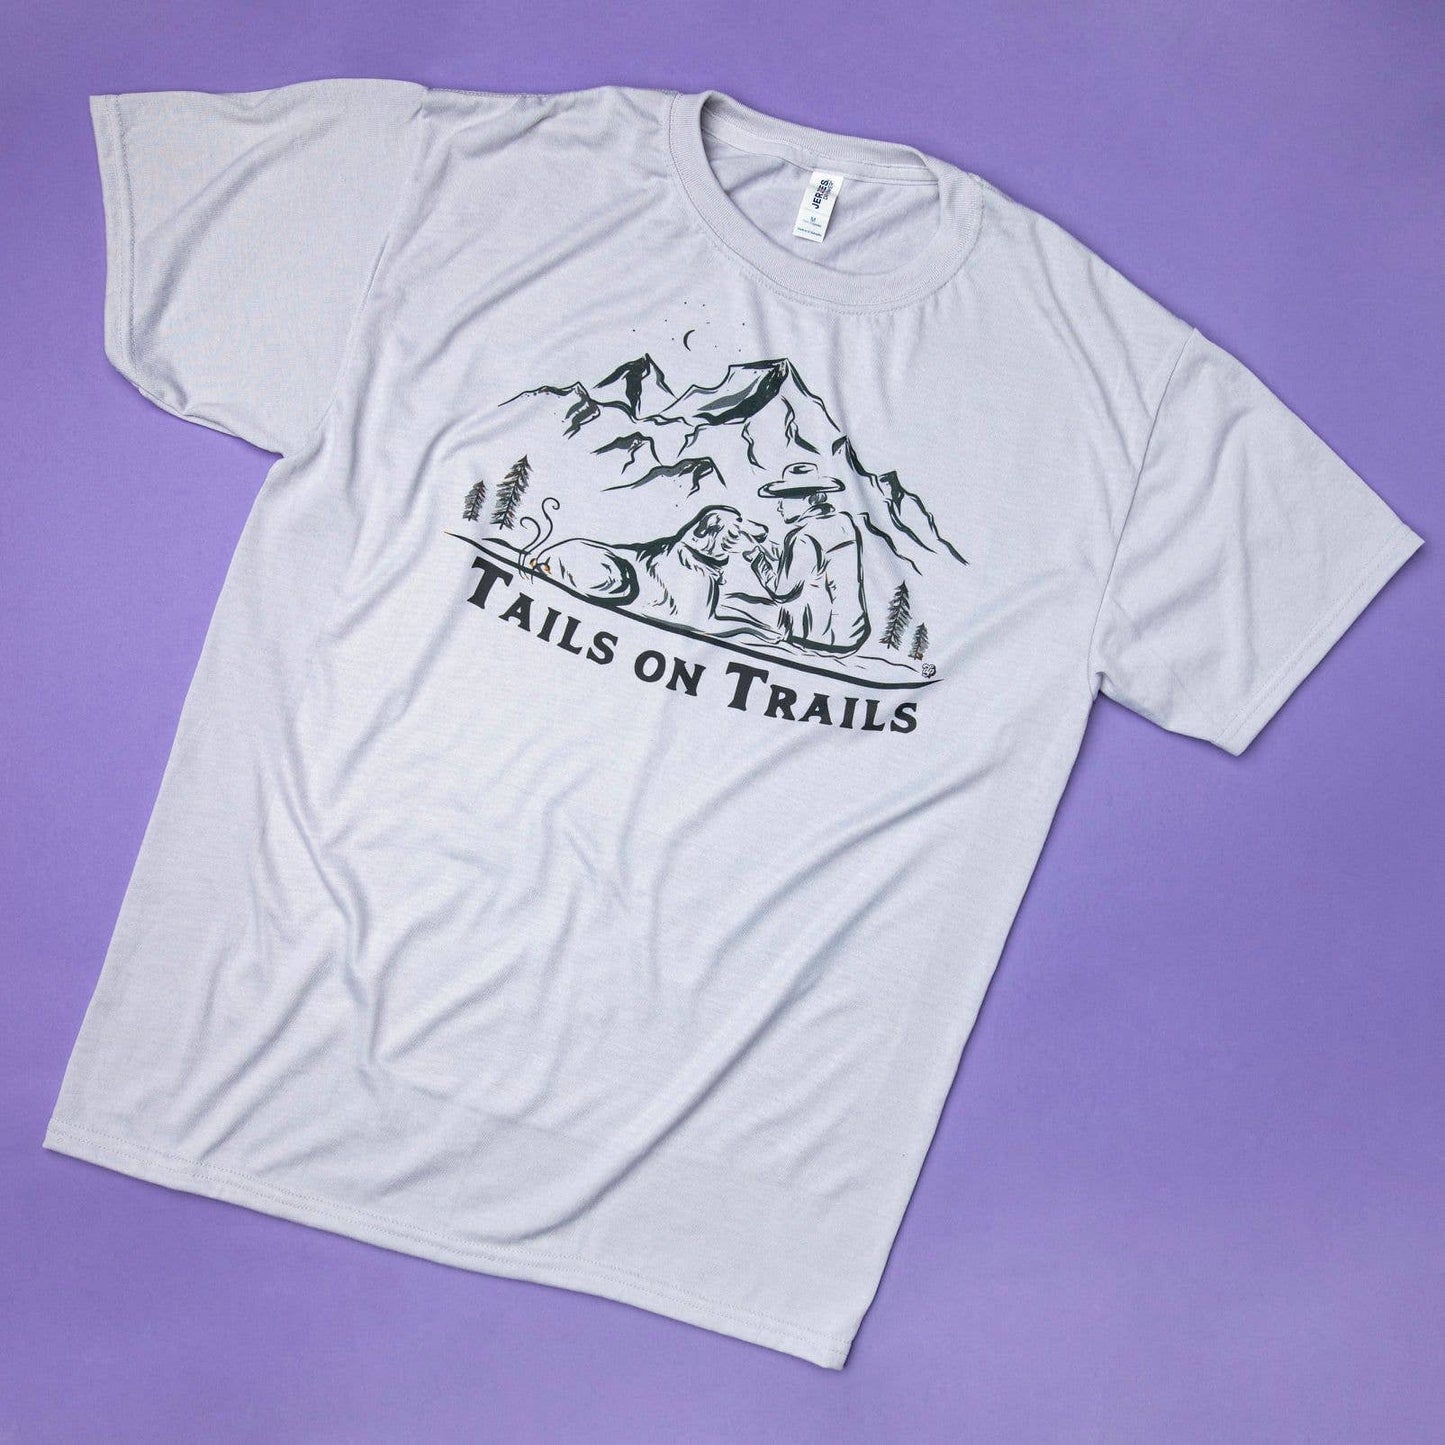 Tails on Trails Tee